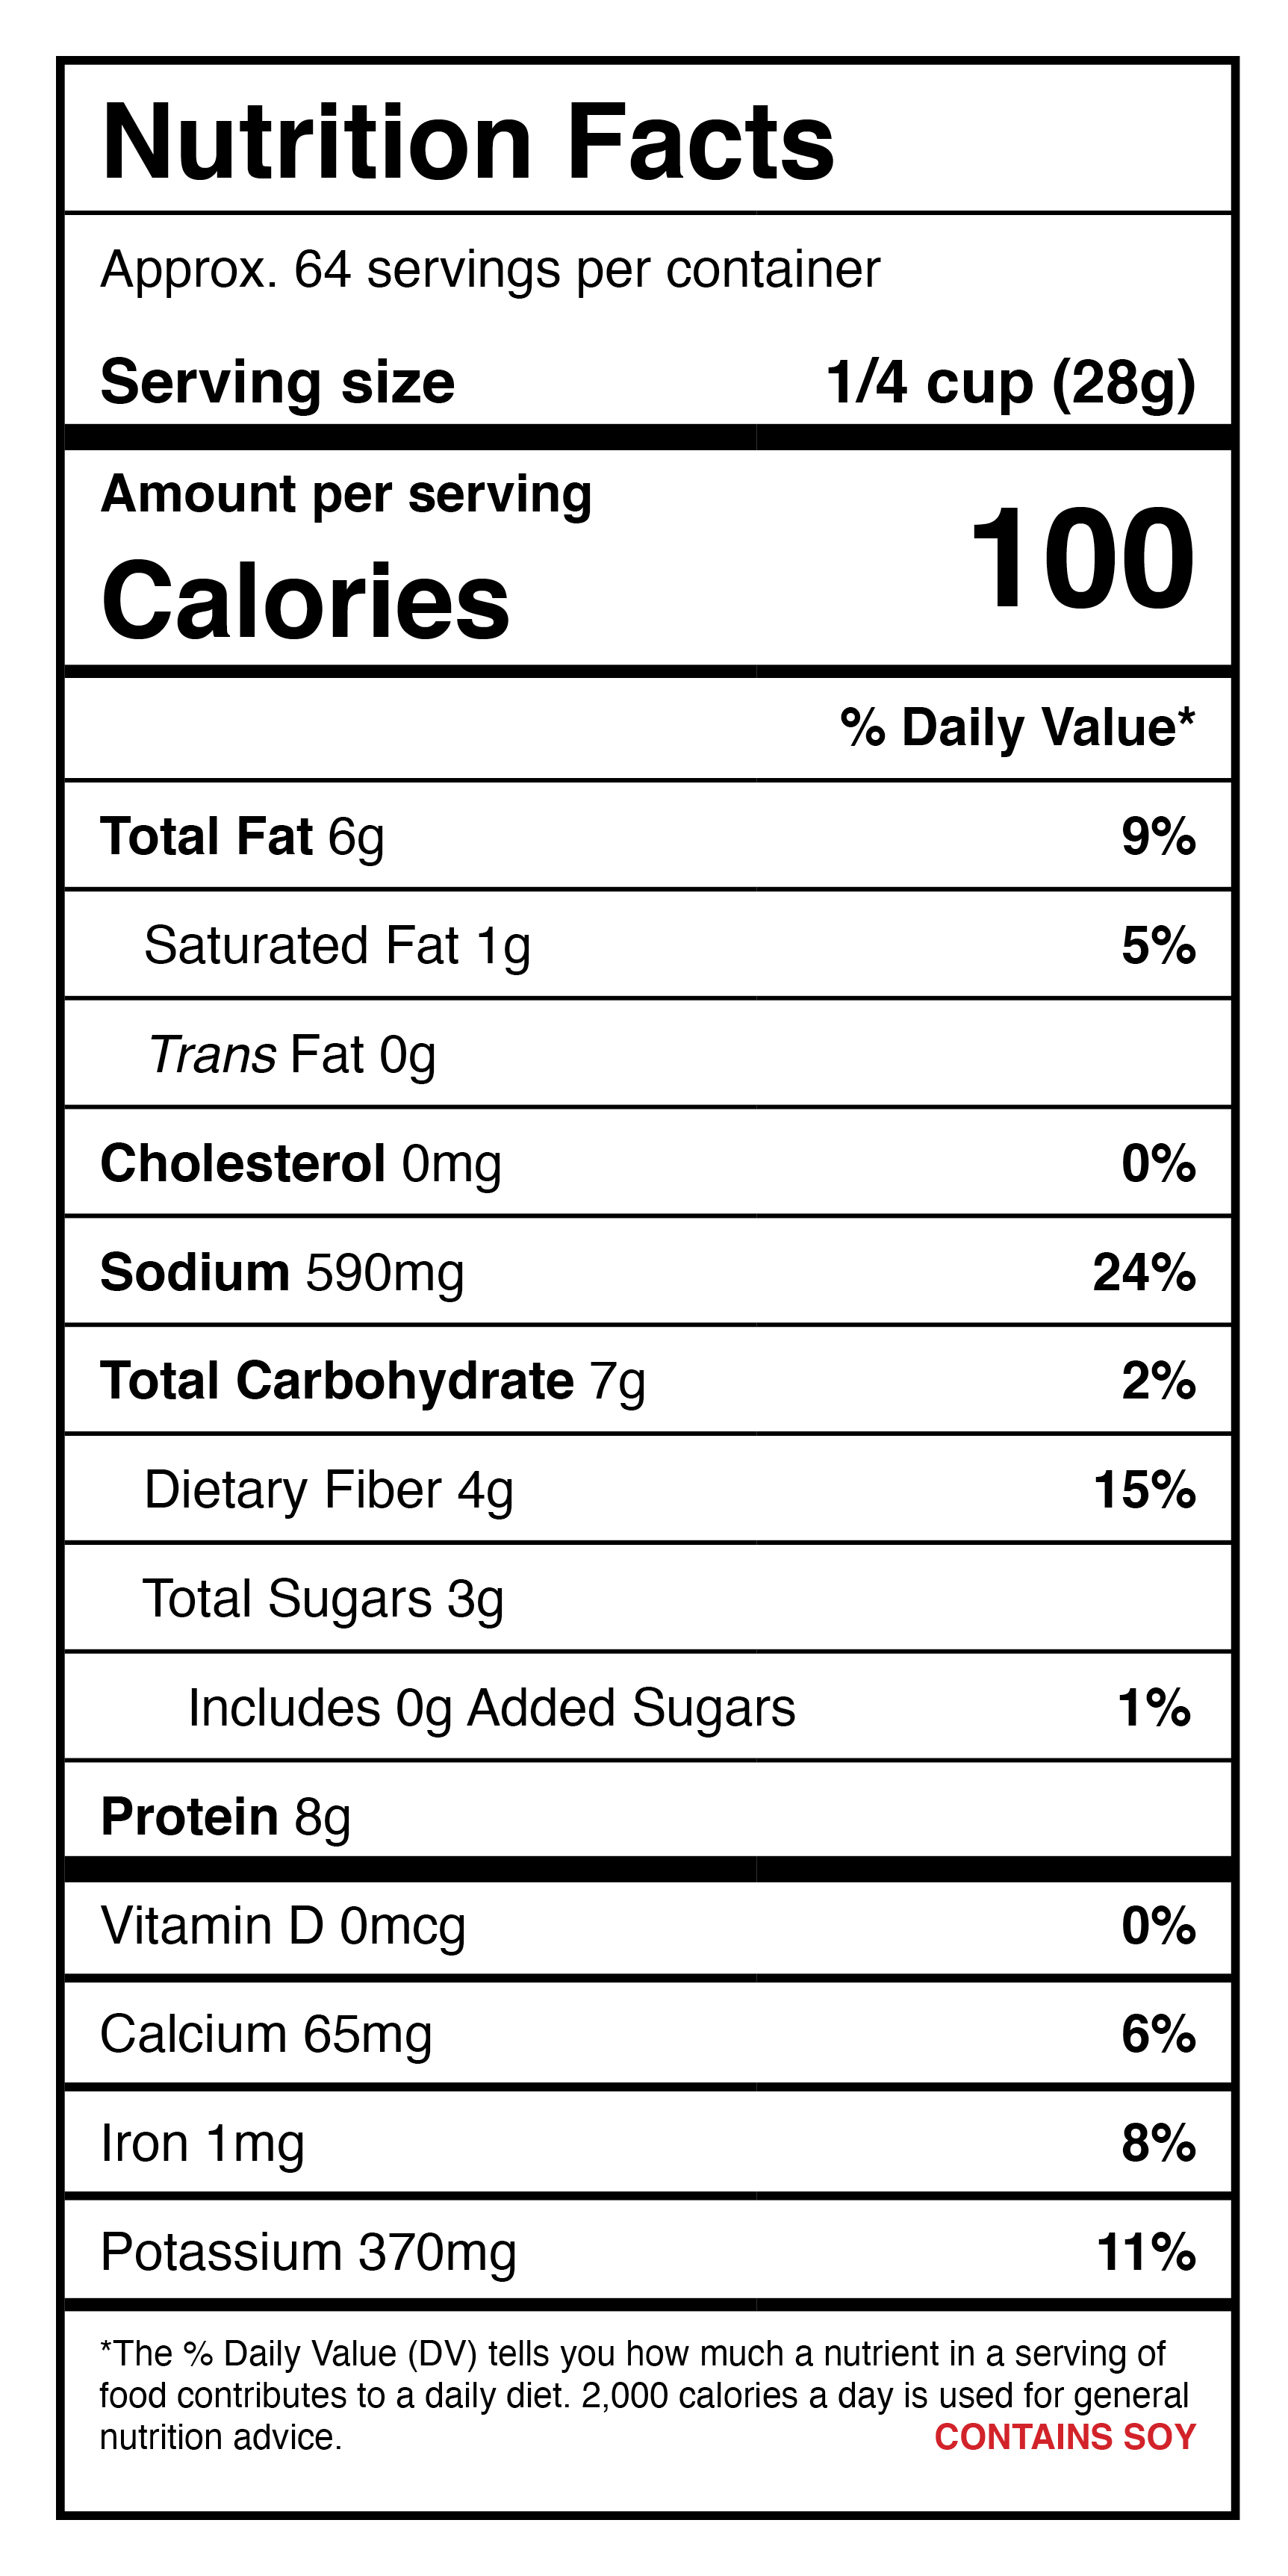 A nutrition label for Harmony House Chorizo Flavored Crumbles.